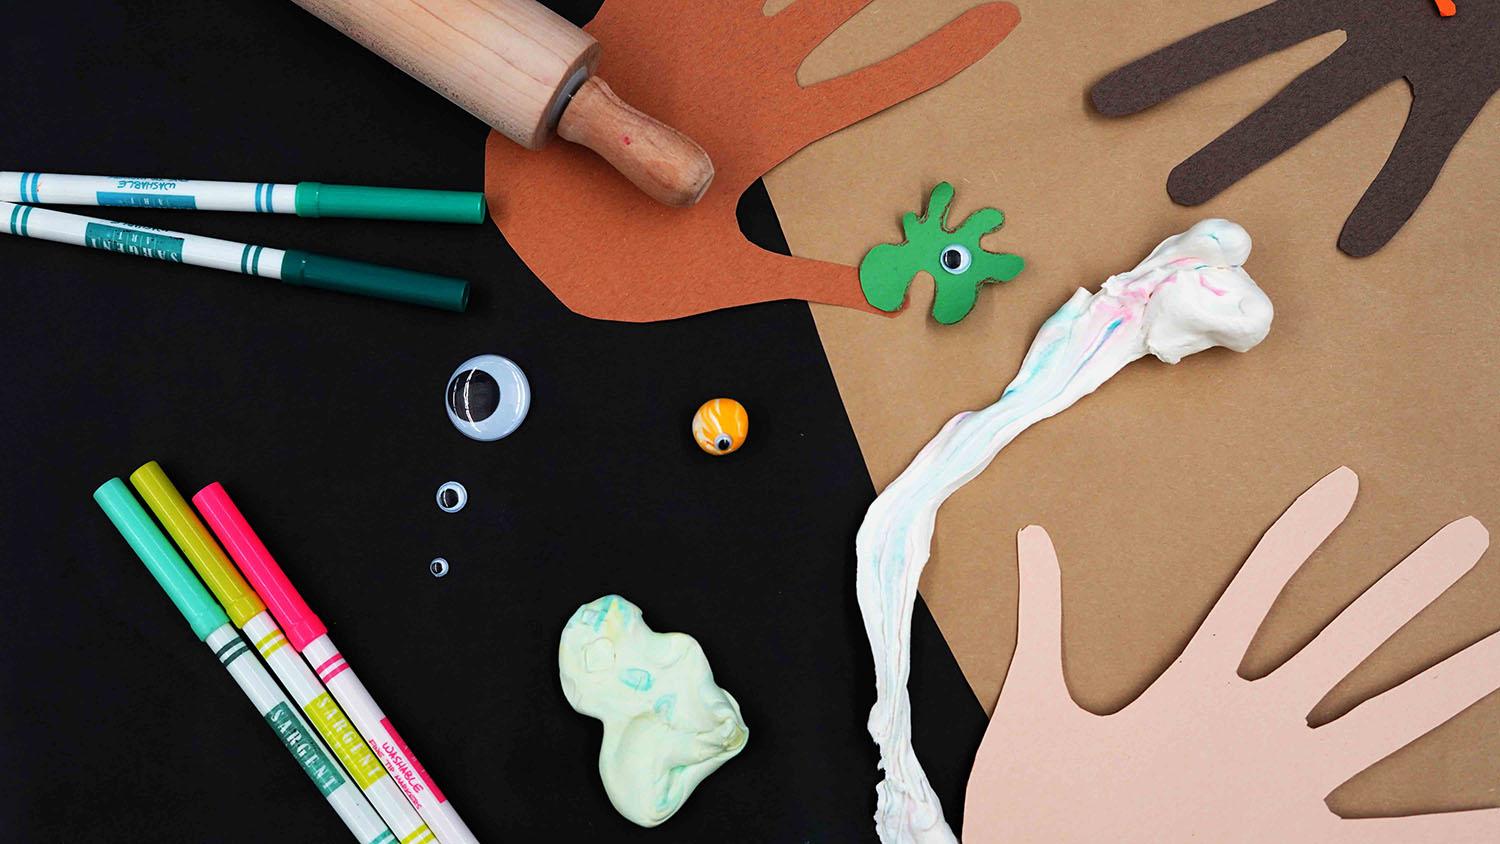 Construction paper hands and more craft materials including pens, clay, and googly eyes